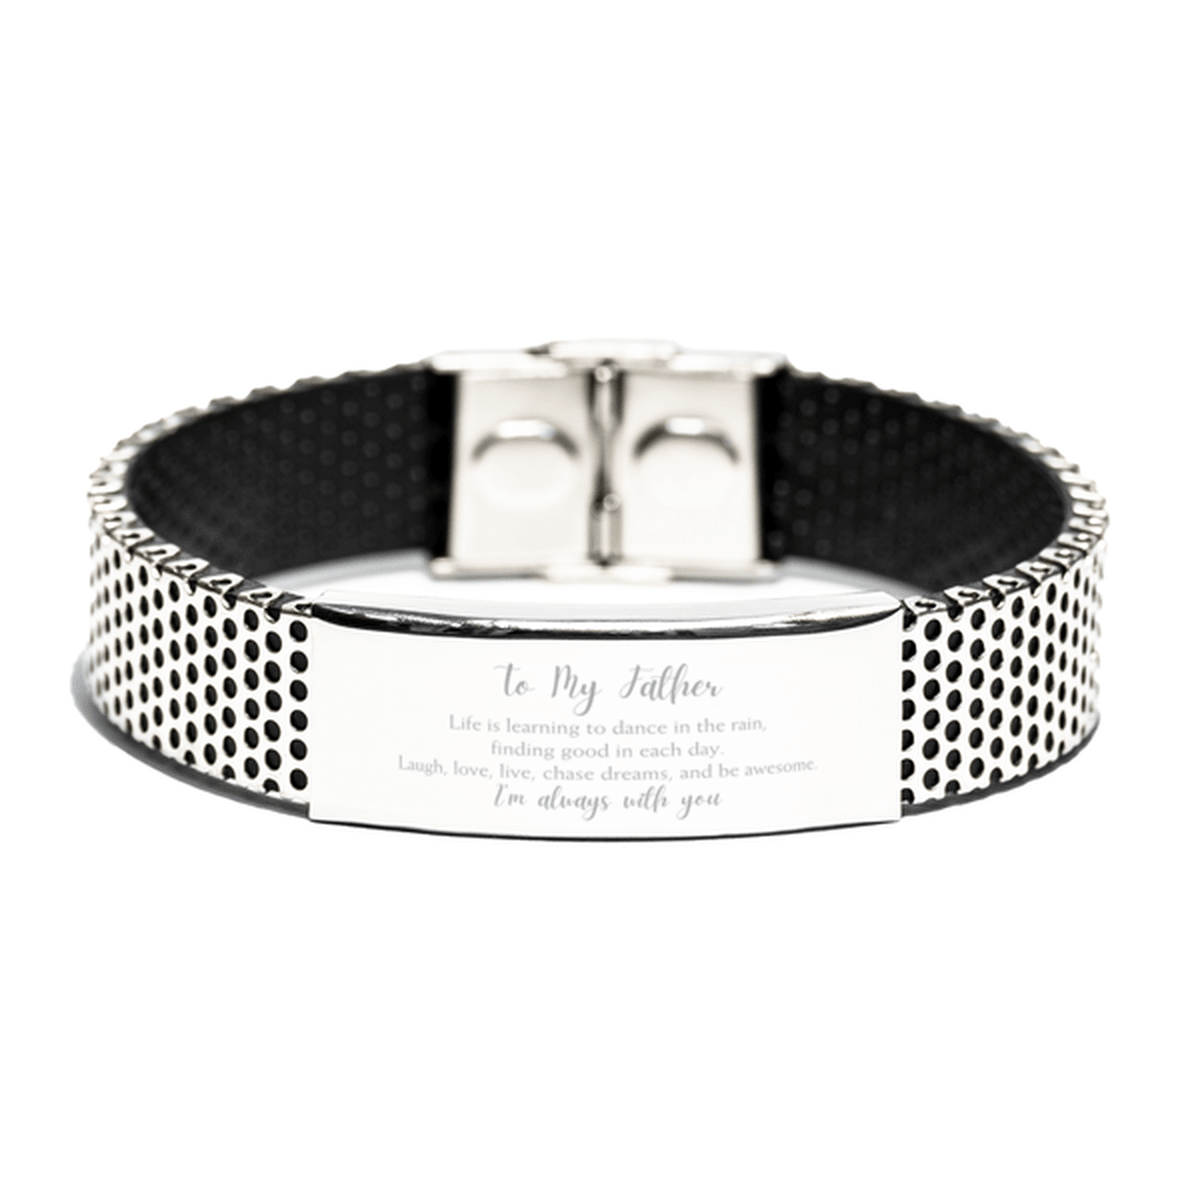 Father Christmas Perfect Gifts, Father Stainless Steel Bracelet, Motivational Father Engraved Gifts, Birthday Gifts For Father, To My Father Life is learning to dance in the rain, finding good in each day. I'm always with you